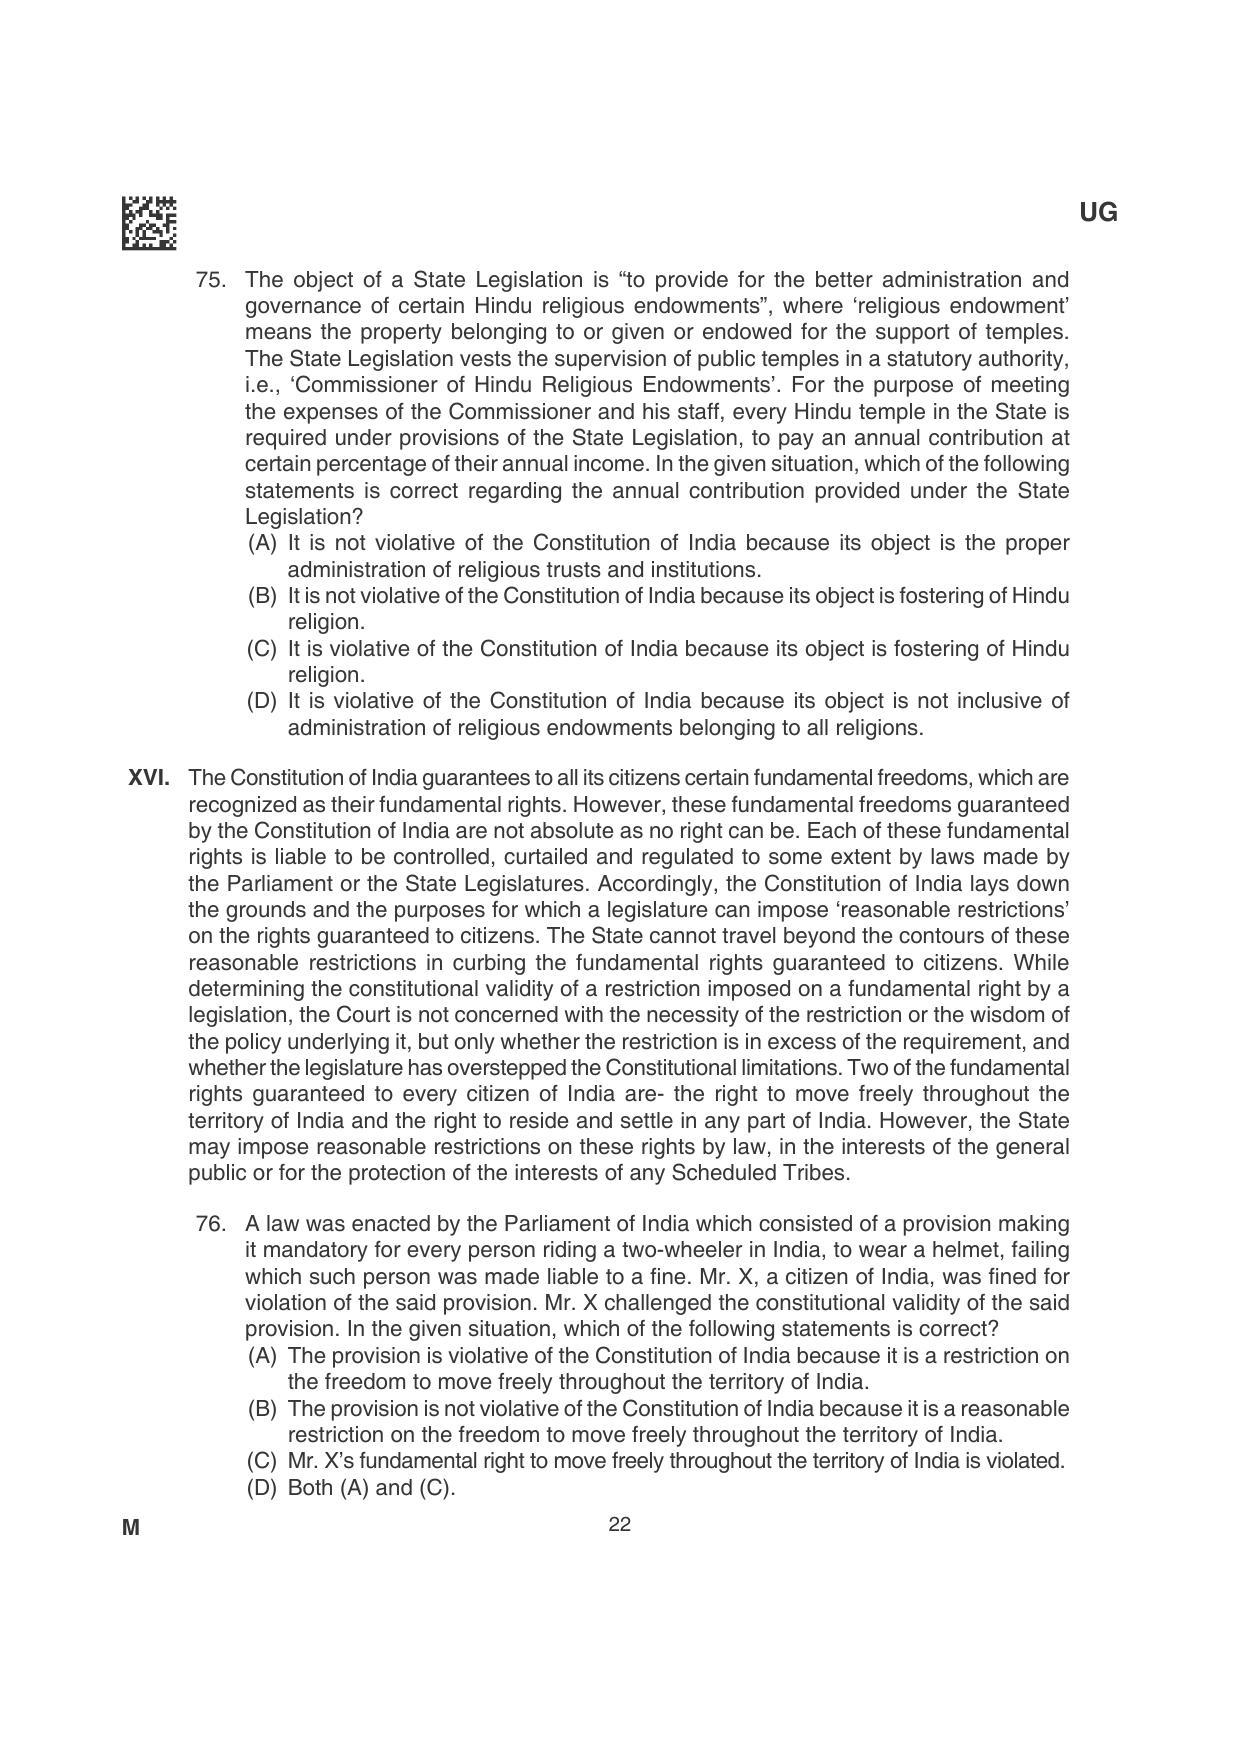 CLAT 2022 UG Question Papers - Page 22